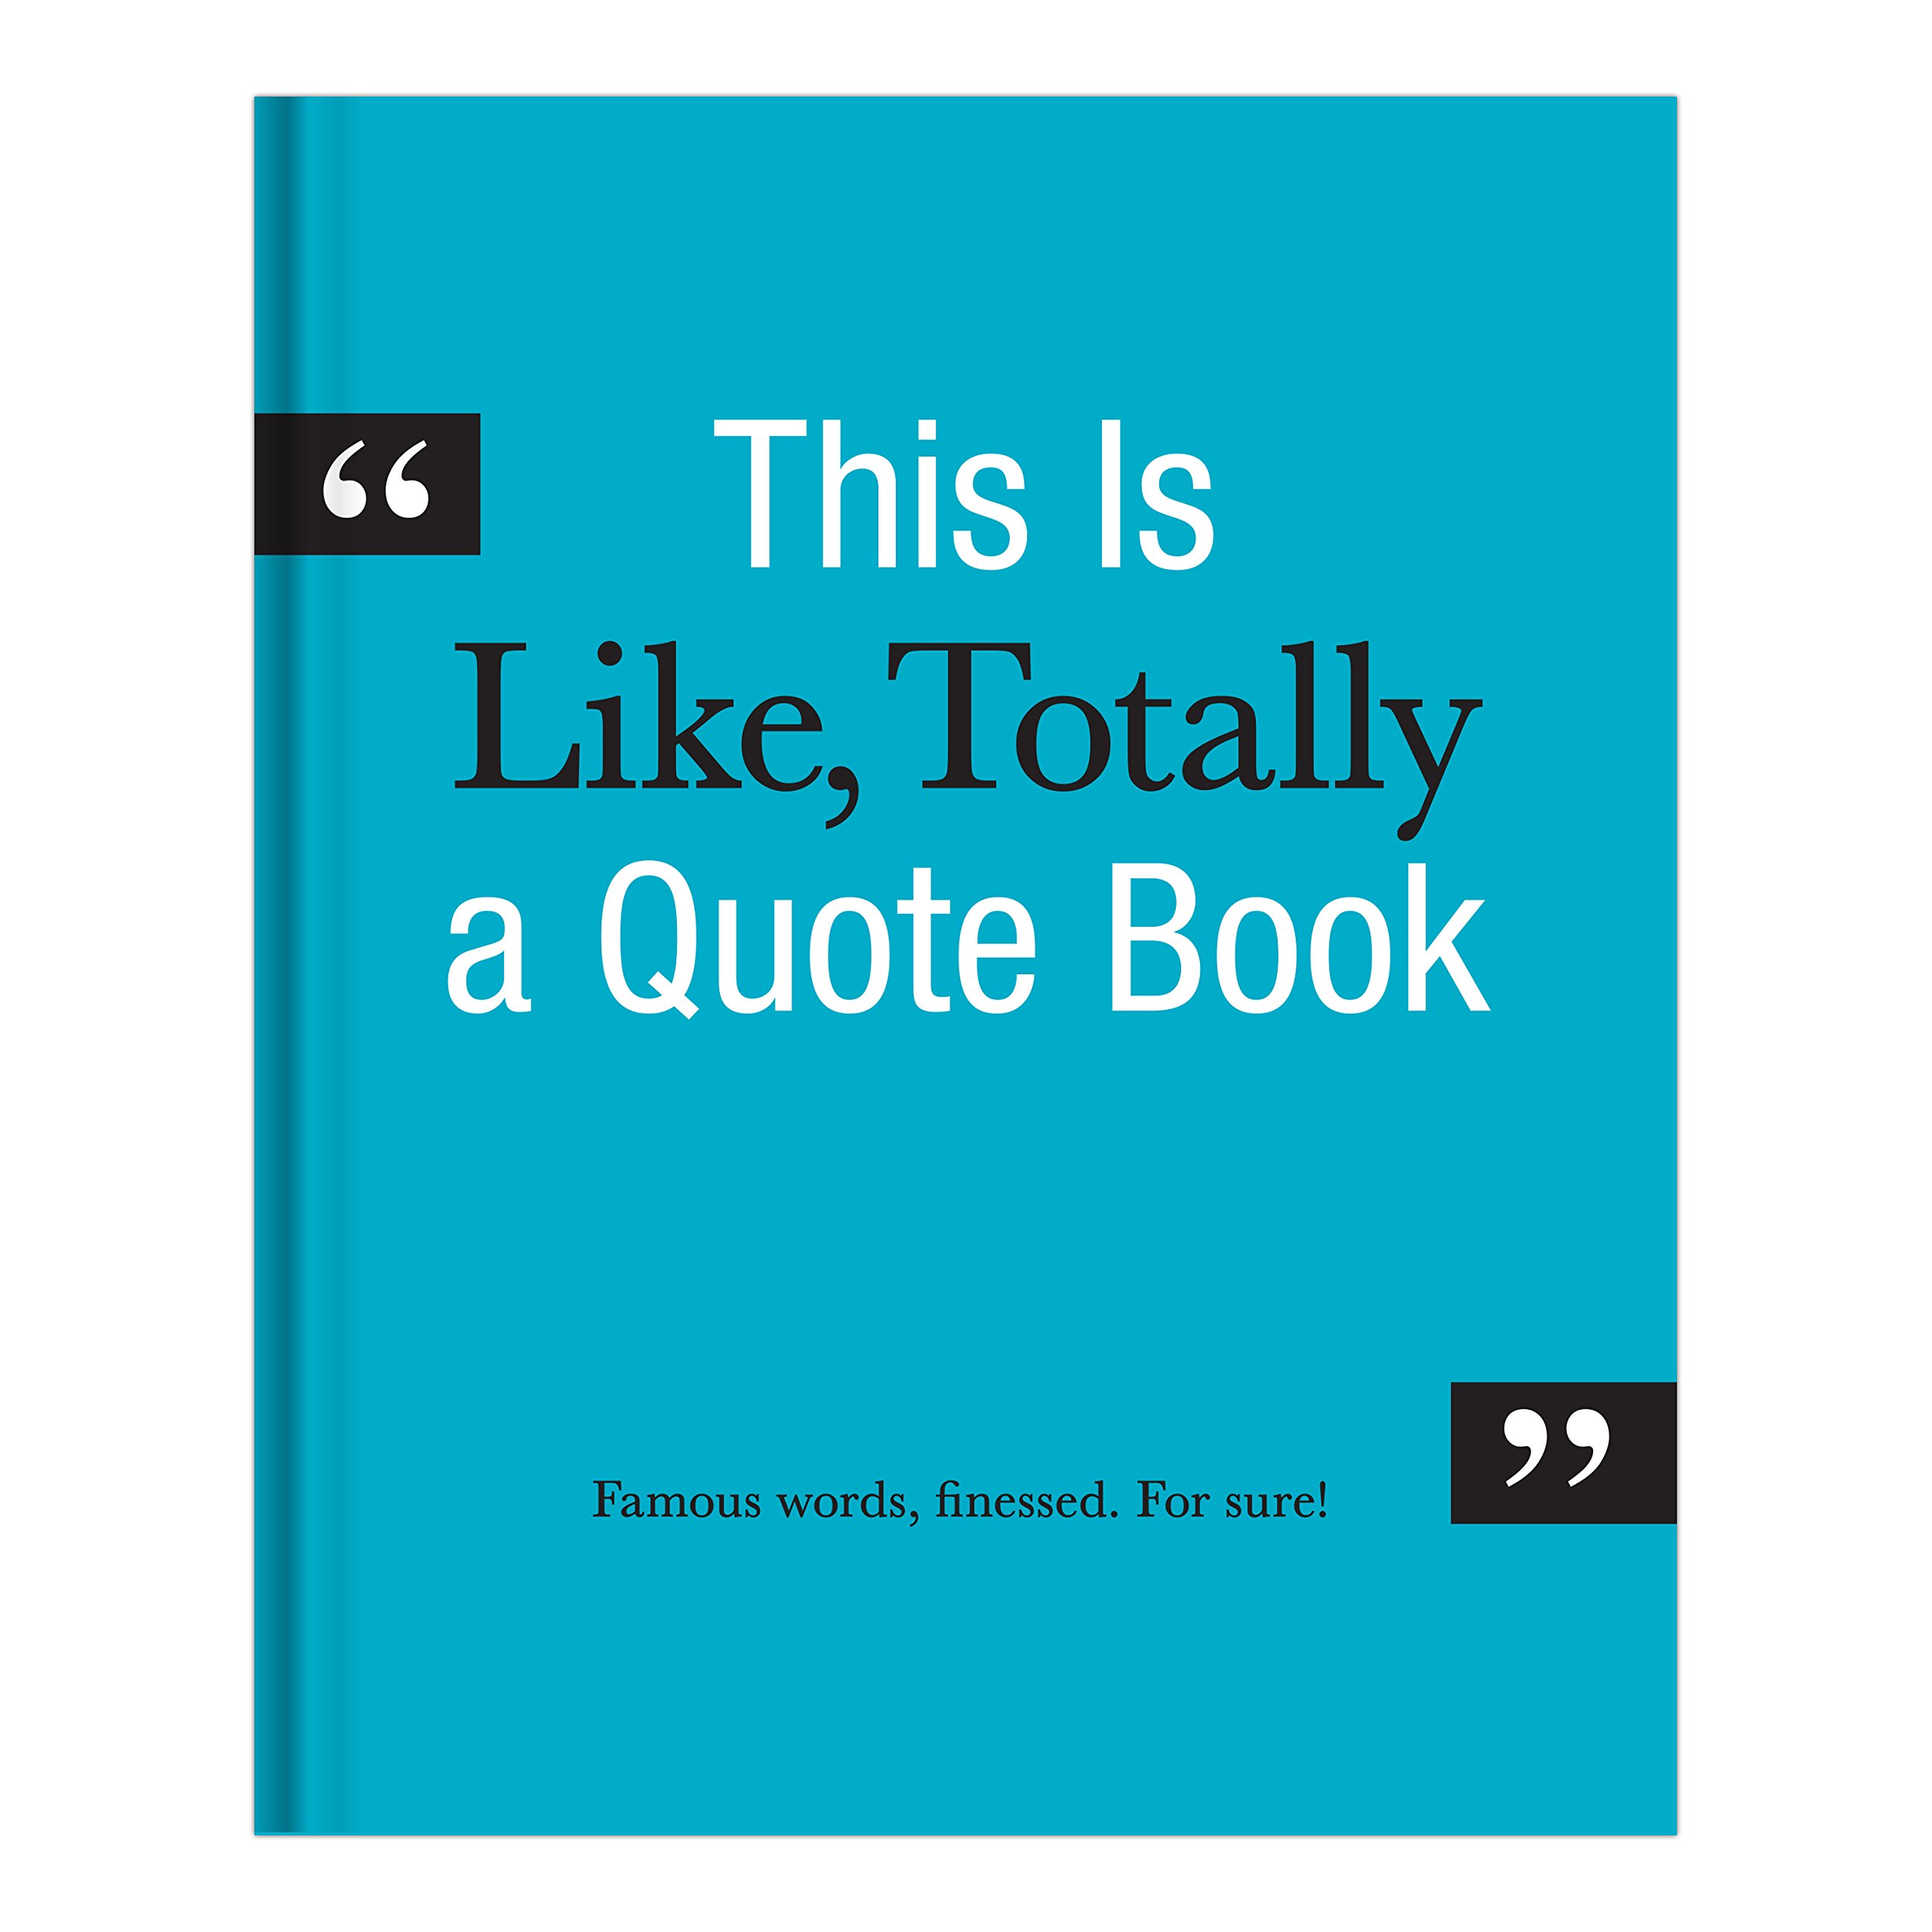 This is Like, Totally a Quote Book